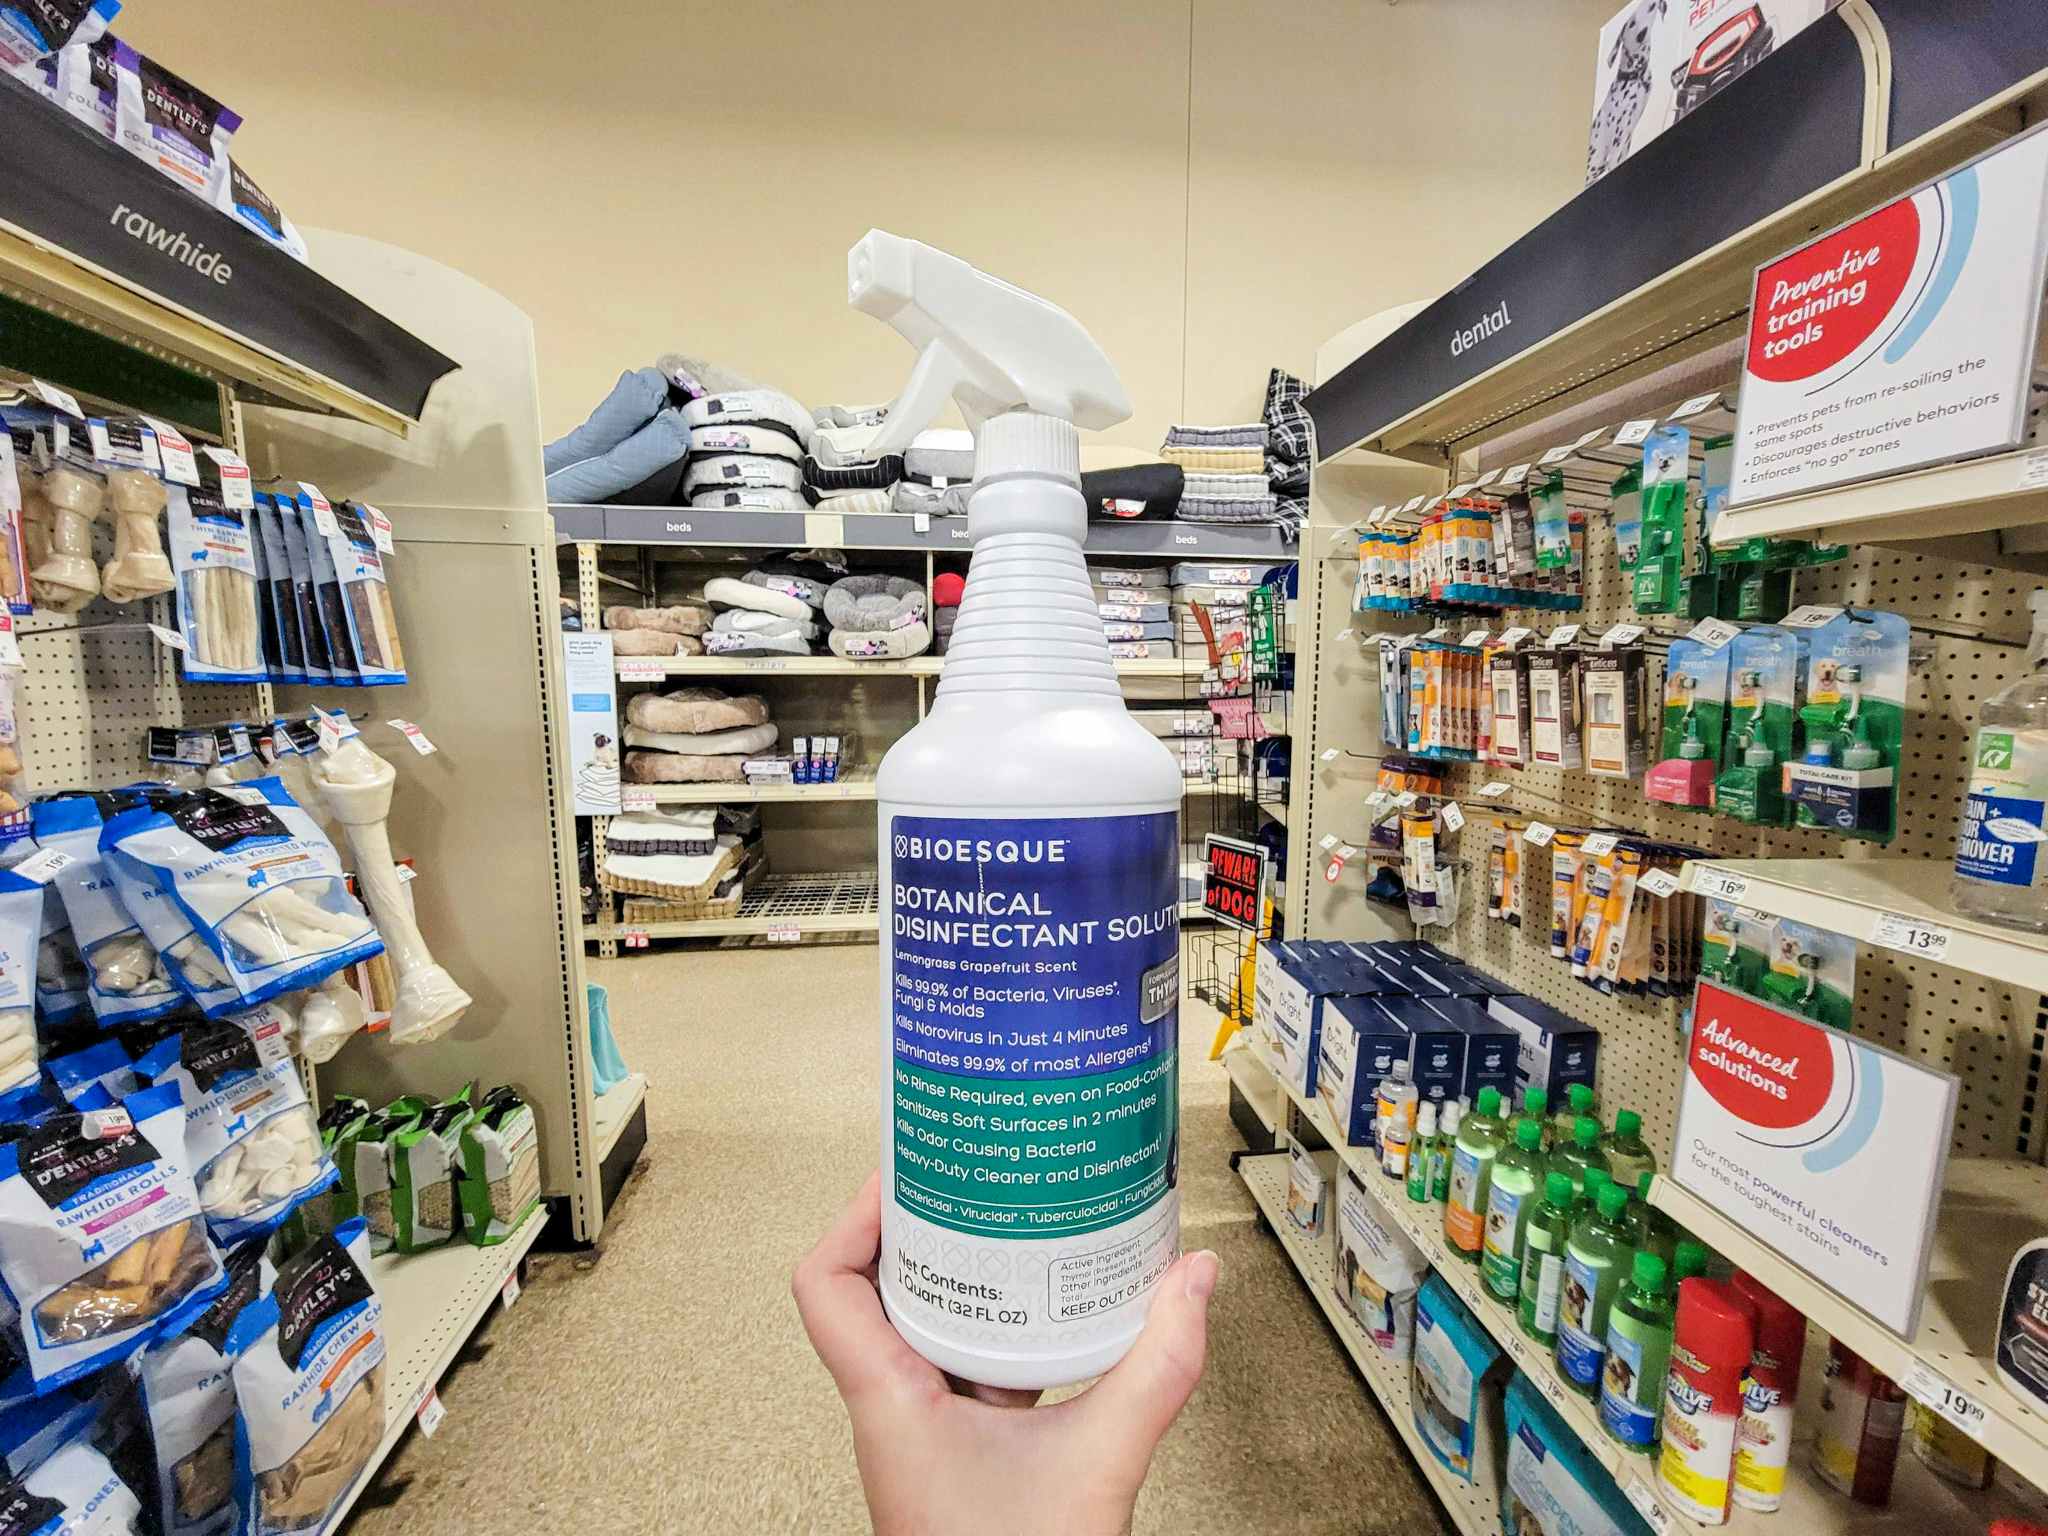 hand holding a bottle of bioesque botanical disinfectant solution spray in an aisle